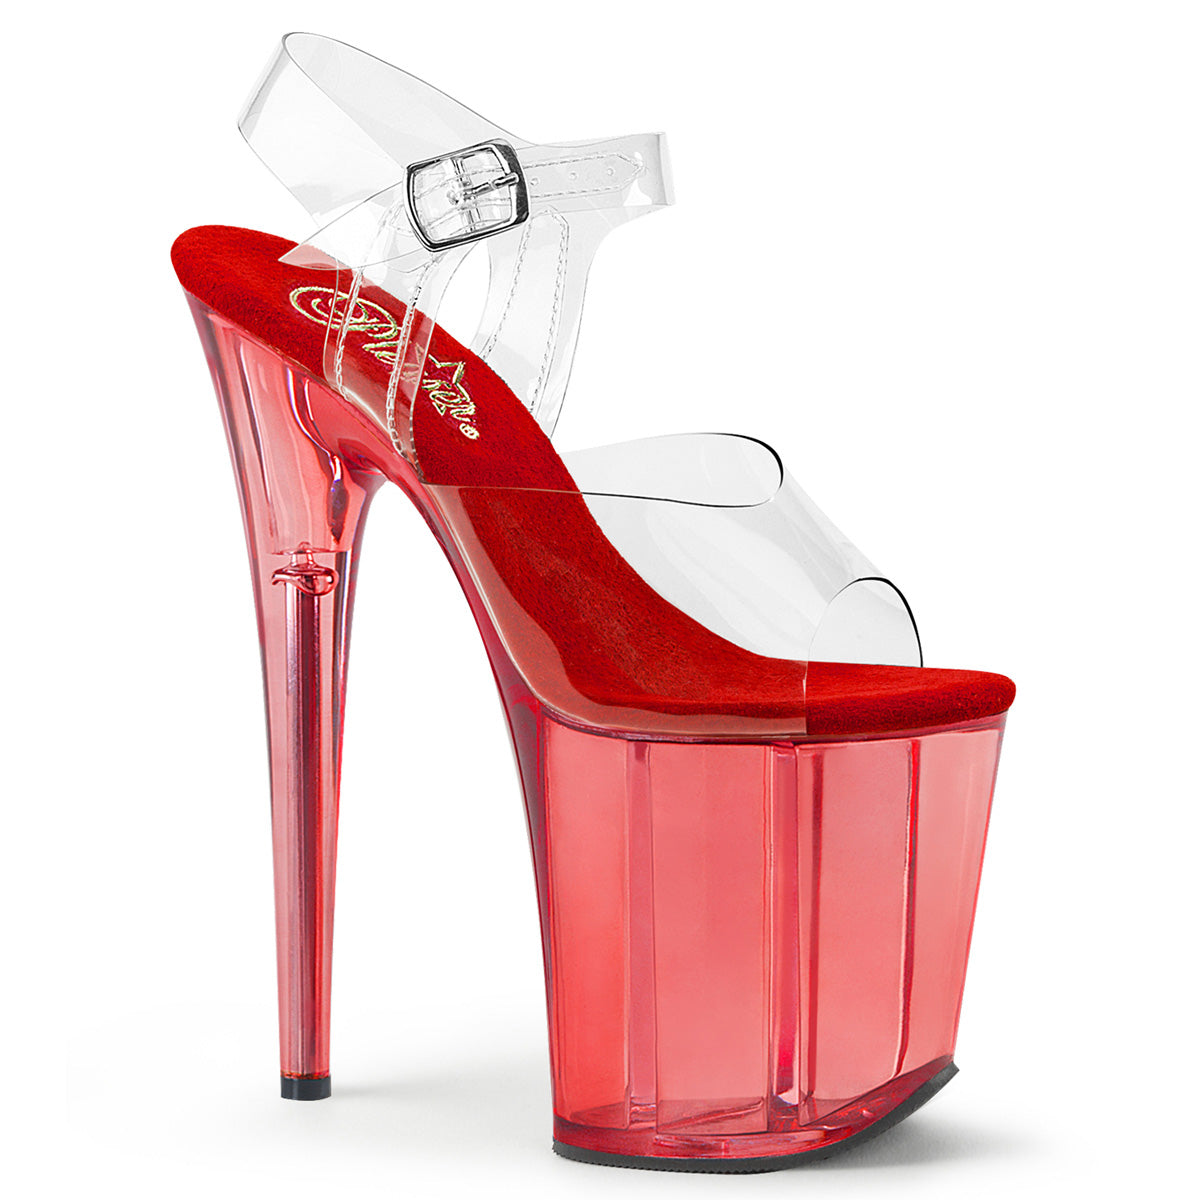 FLAMINGO-808T 8" Clear and Red Tinted Pole Dancer Platform Shoes